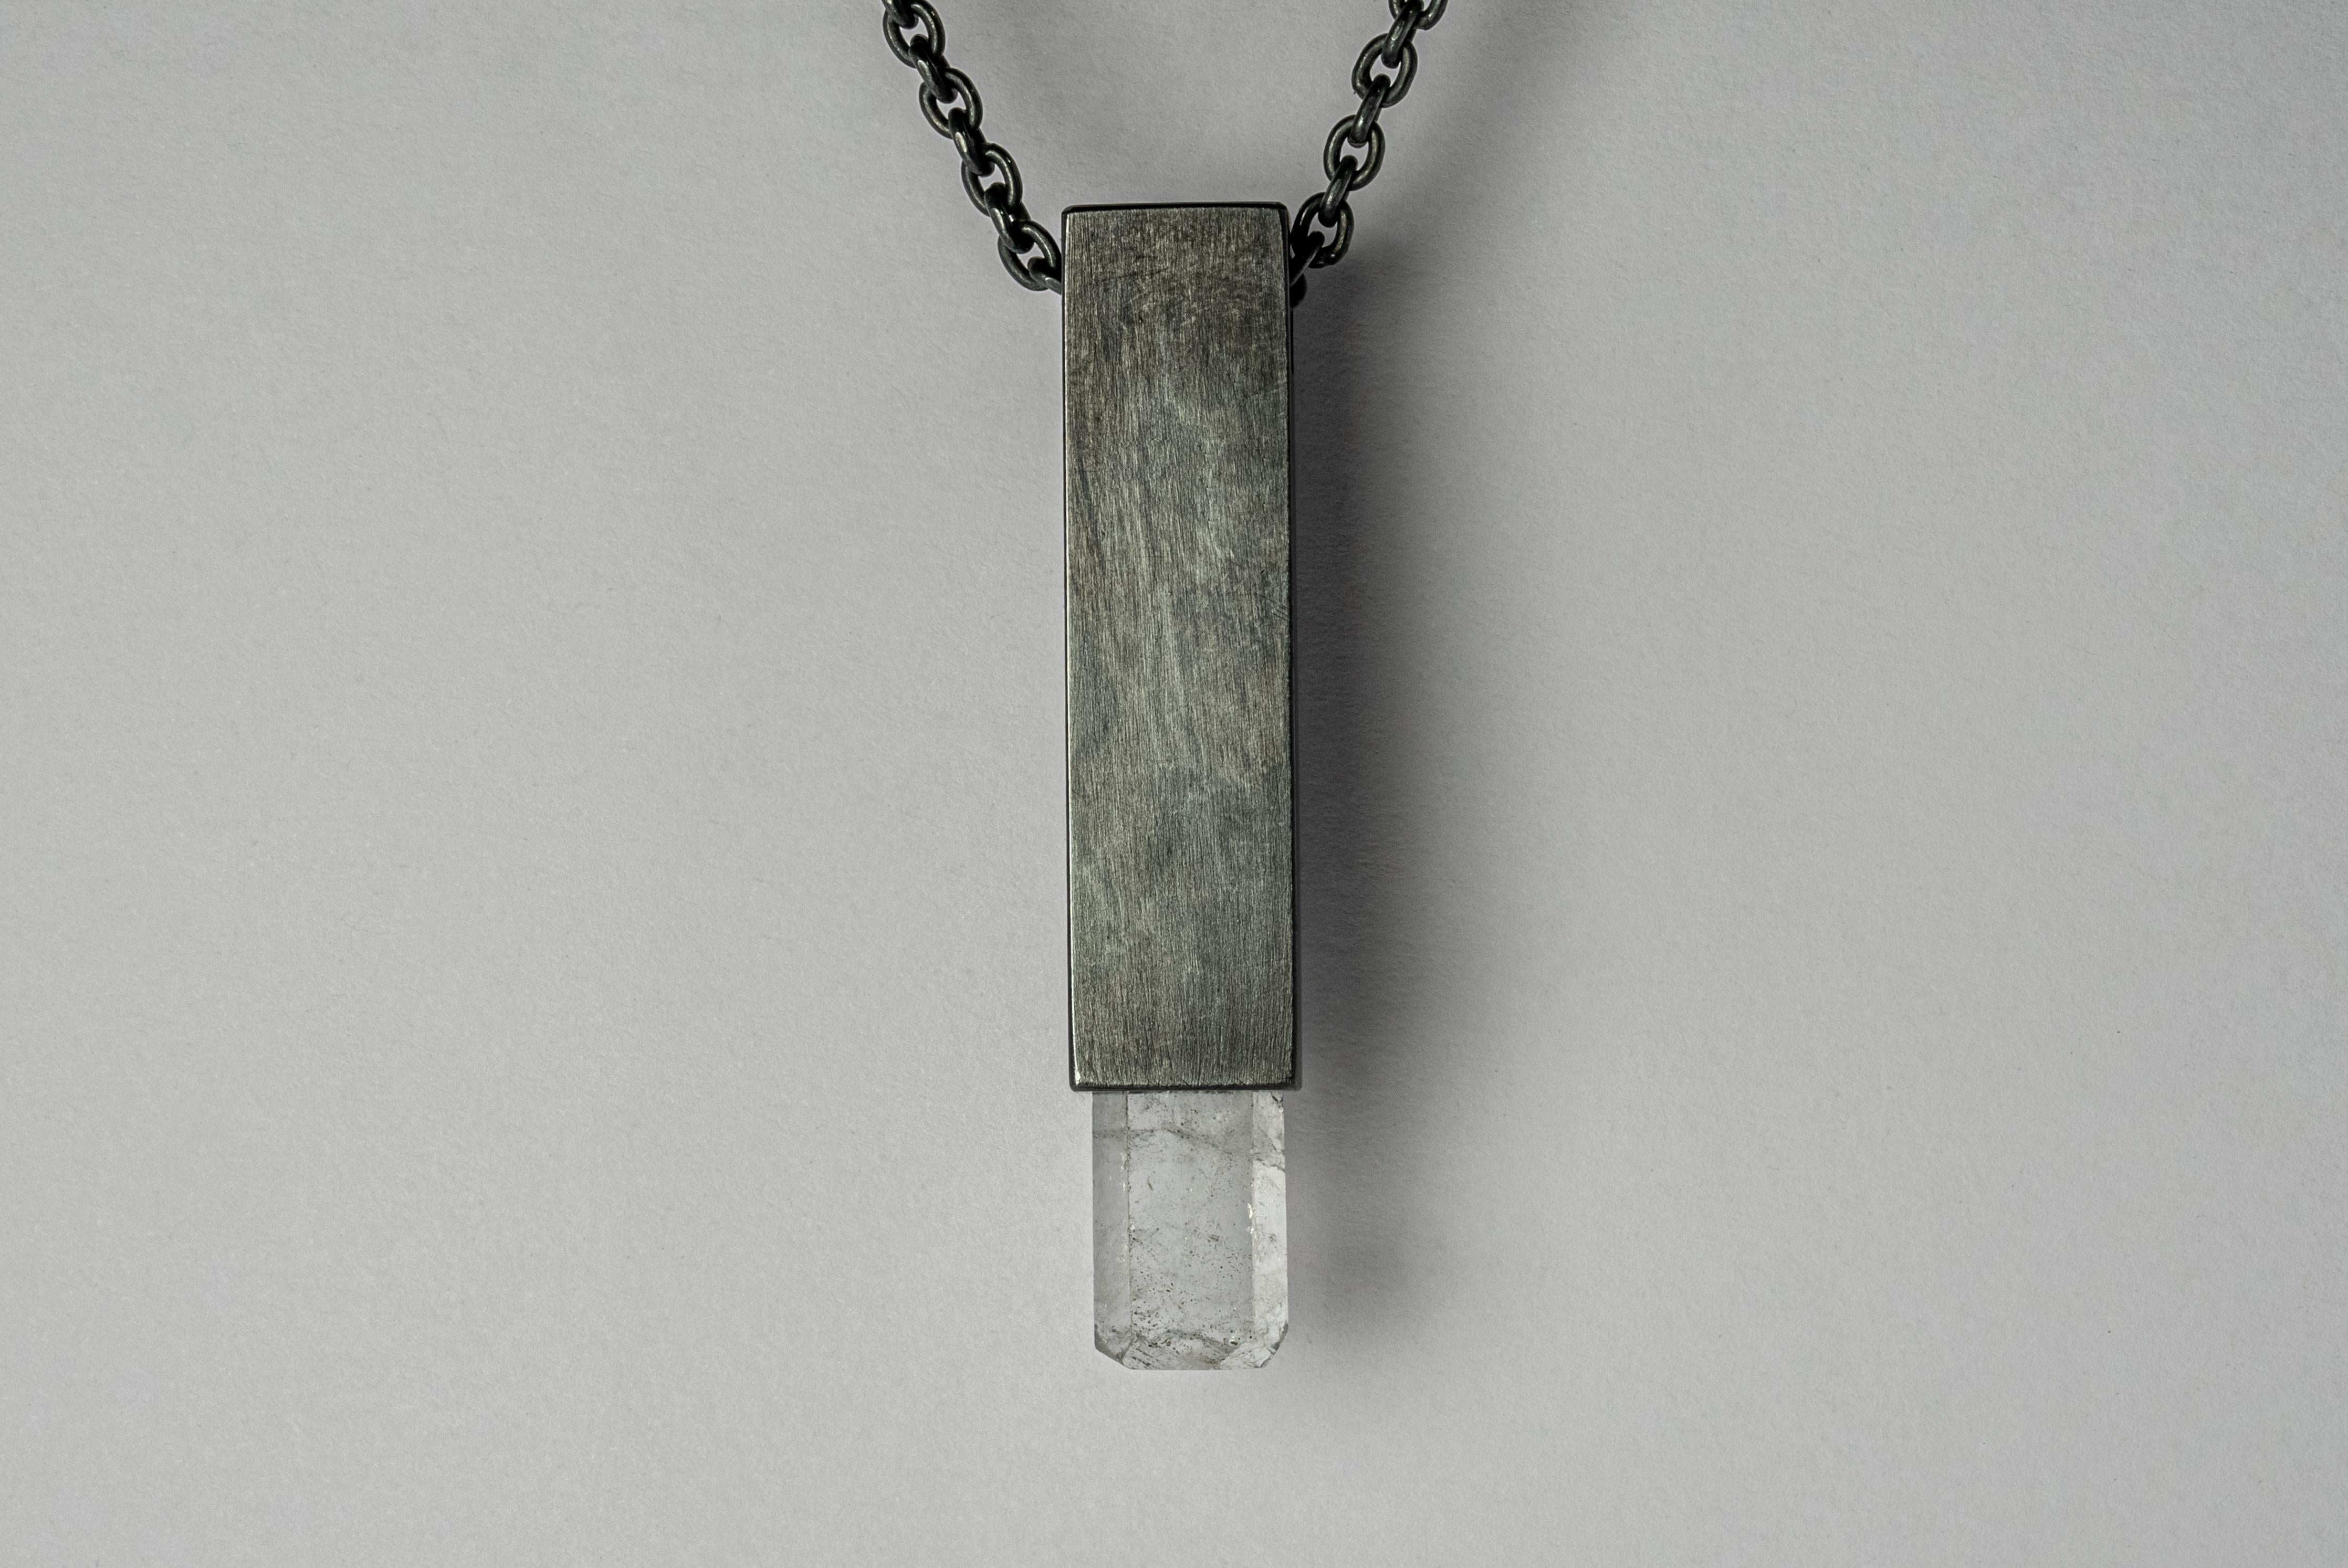 Necklace in the shape of cuboid made in oxidized sterling silver and a rough of aquamarine. The Talisman series is an exploration into the power of natural crystals. Tools for Magic. The crystals used in these pieces are discovered through adventure